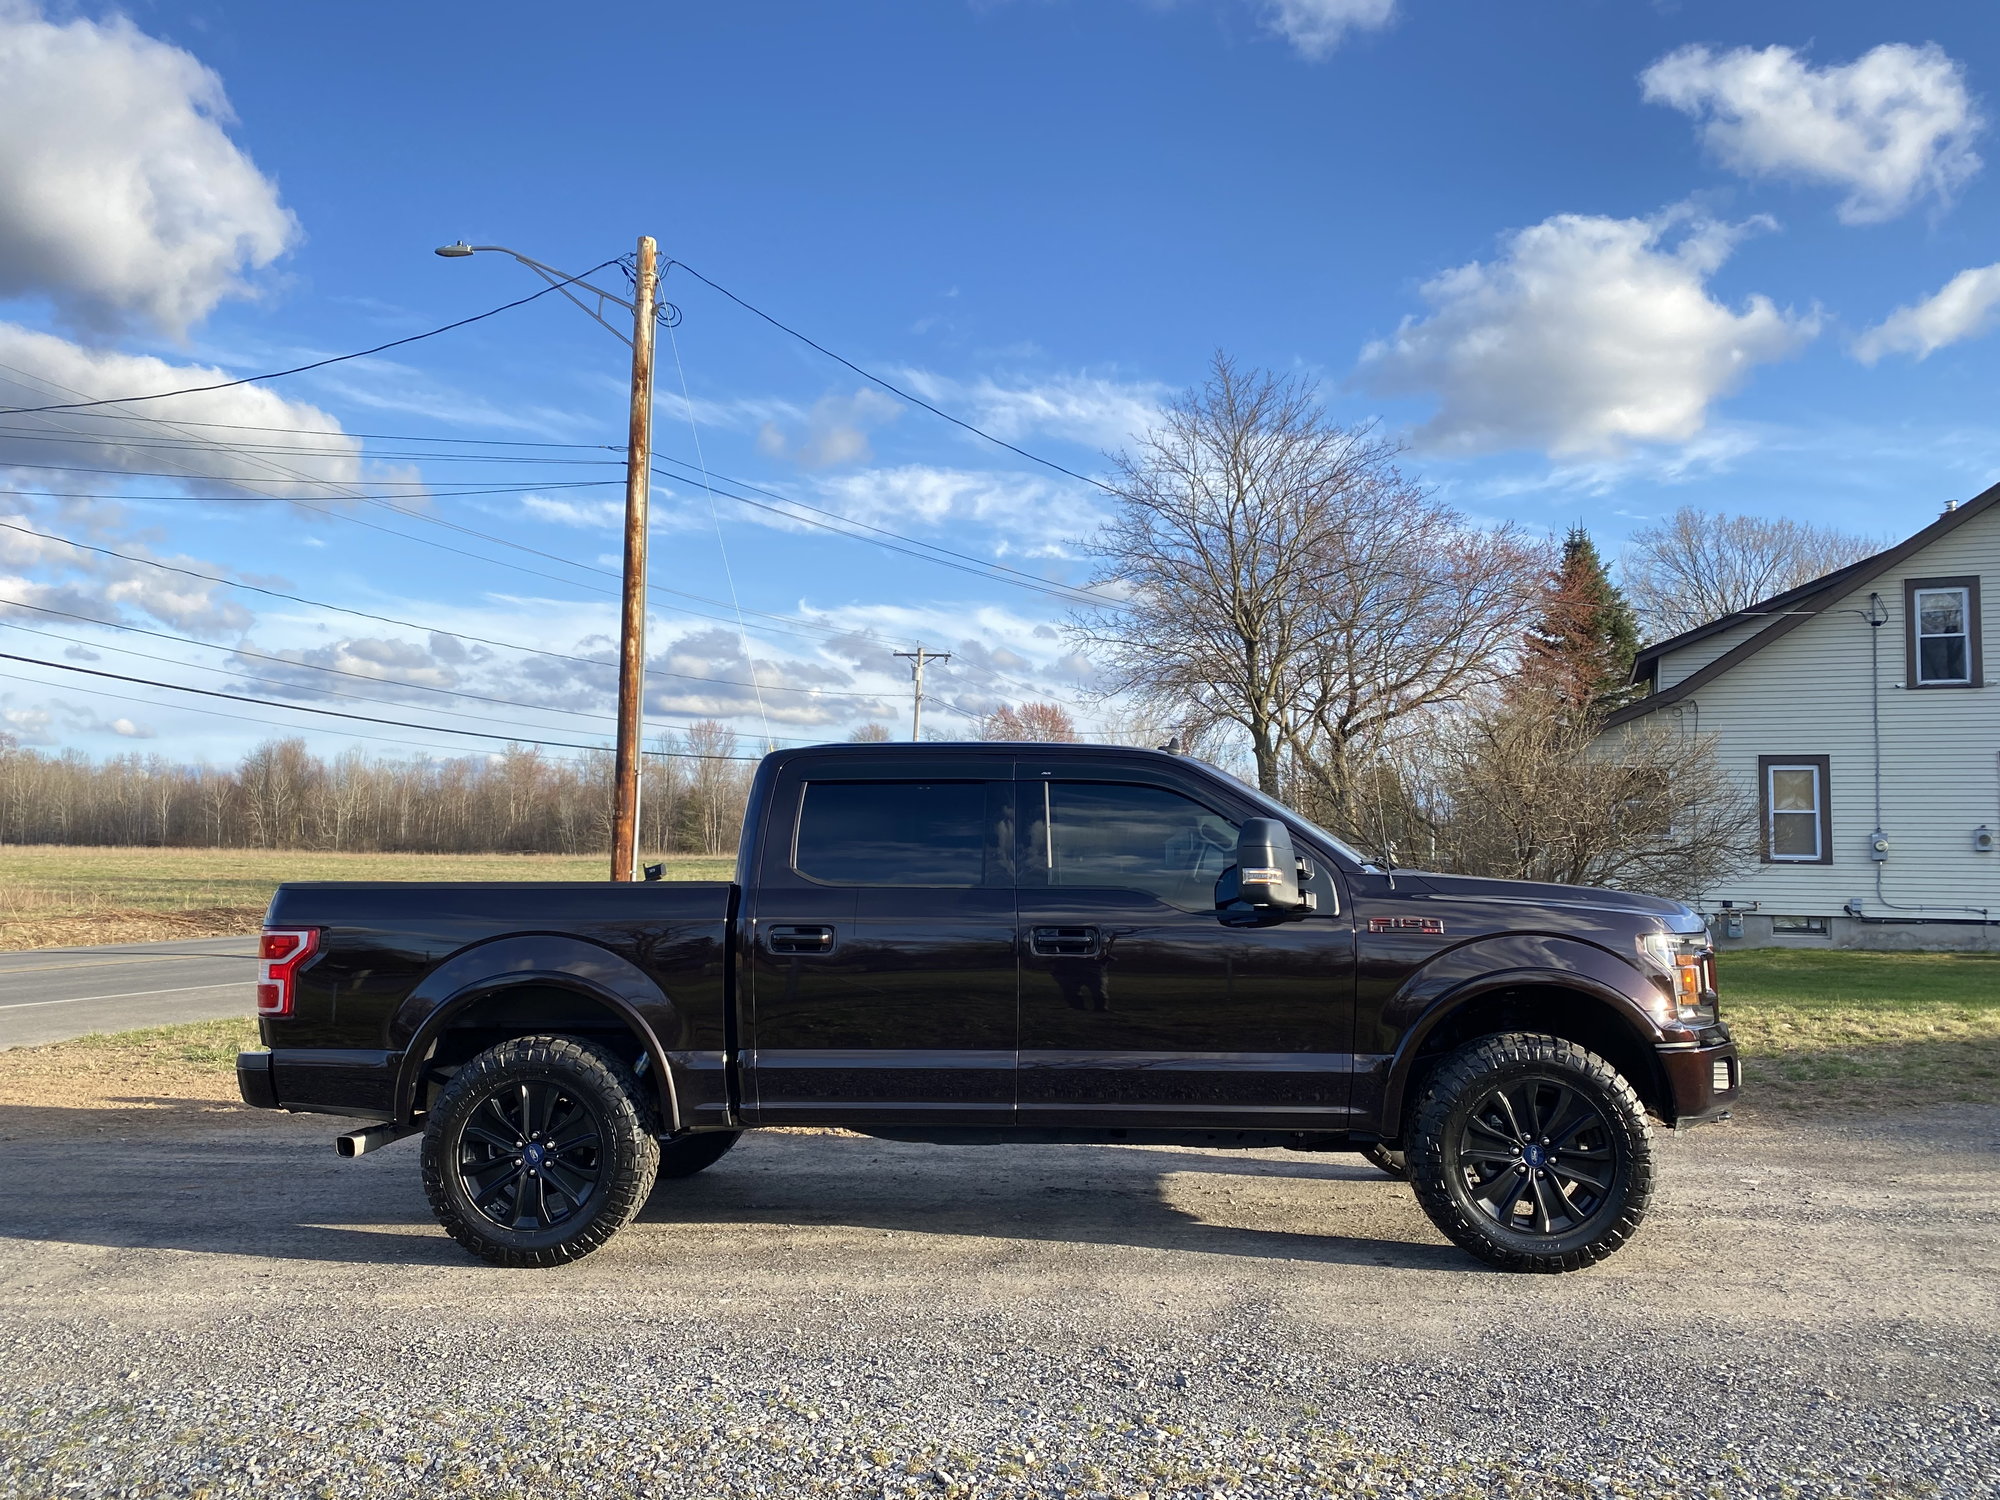 Atturo trail blade xt - Ford F150 Forum - Community of Ford Truck Fans 10 Ply Tires On Half Ton Truck